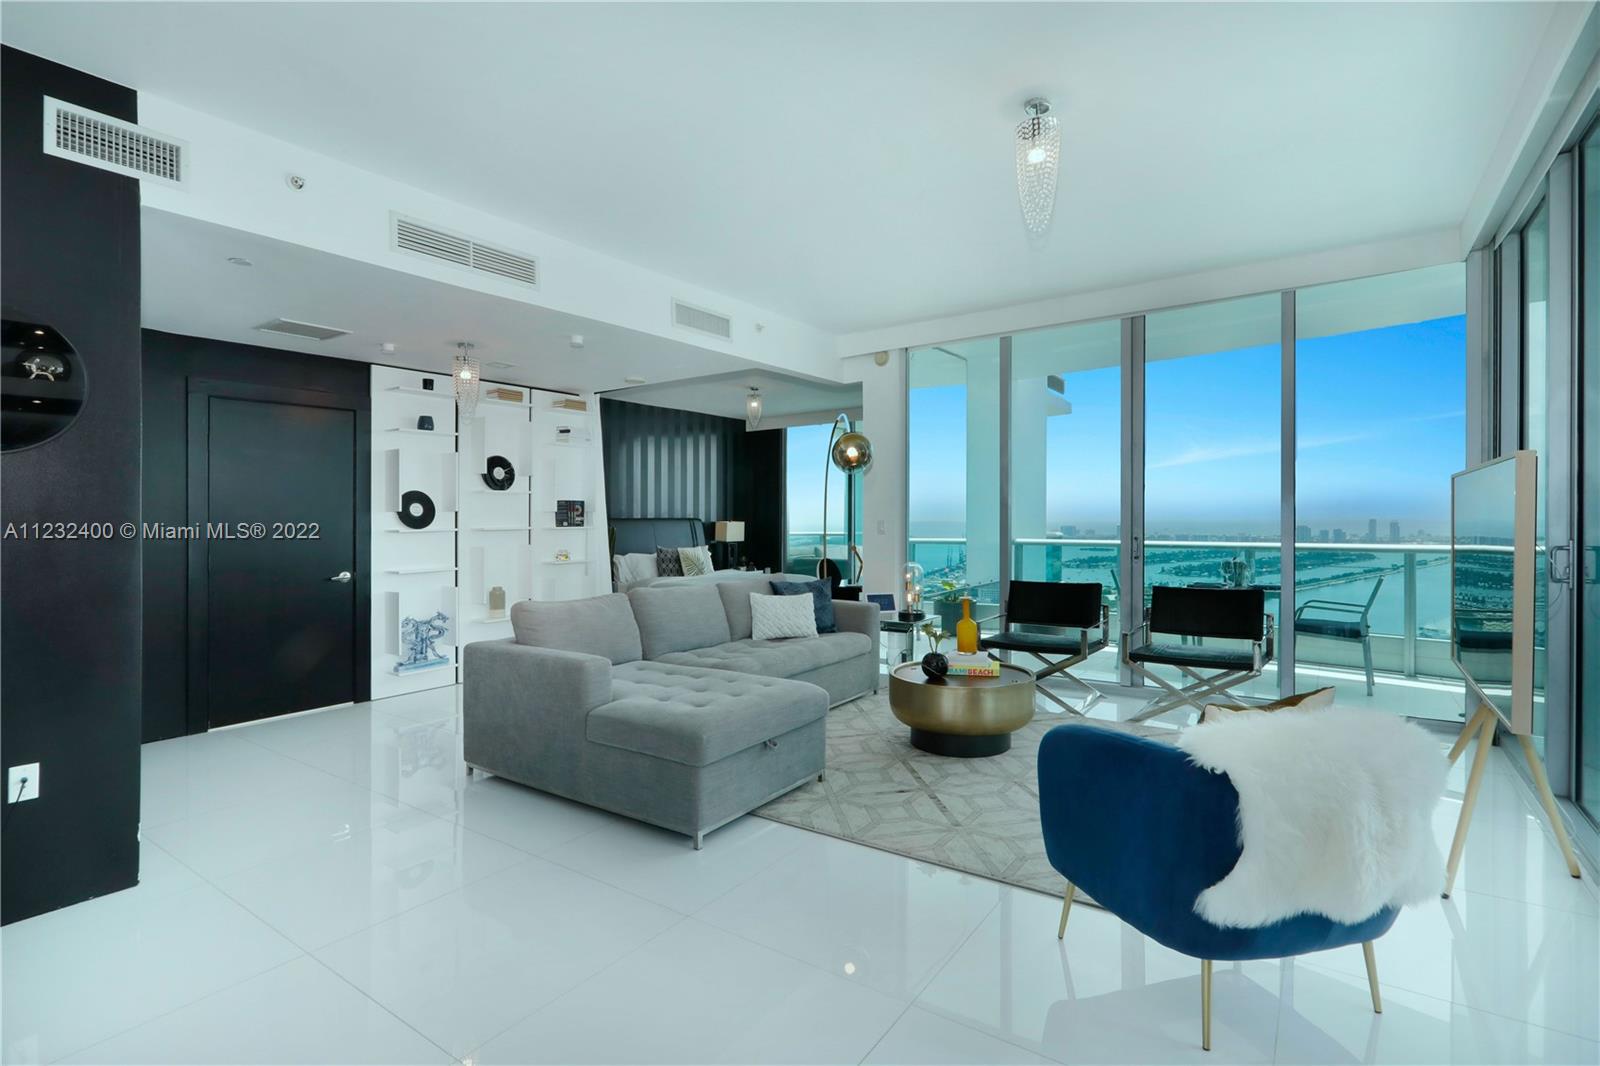 IMPECCABLY DESIGNED HIGH FLOOR FLOW-THRU RESIDENCE WITH SUNSETS & PANORAMIC OCEAN, BAY & DOWNTOWN VIEWS! Fully Furnished & Available for Immediate Short Term 1-6 Month Rental. Private Elevator Entry into Open Floorplan w/ 1,796 SF Living Space + 802 SF of 3 Wraparound Terraces w/ 2 Beds + Den + 3.5 Baths. Breathtaking Views from Living Area w/ Custom Built-in White Bookcases. Aran Cucina Italian Chef’s Eat-in Kitchen  w/ SS SubZero & Miele Apps w/ Mirrored Cabinetry, Island & Mirrored Bar + Dining Area. Master Suite w/ Bay Views & Terrace. Master Bath w/ Mirrored Wall & Double Vanity. Custom Lighting & Automatic Shades. Architecture by Luis Revuelta & Common Areas by Sam Robin w/ 2 Pools, Spa, Gym, Lounge, Kid's Room, Concierge, Valet & Security. HIGH SEASON PRICING AFTER NOV 1ST - $12,500